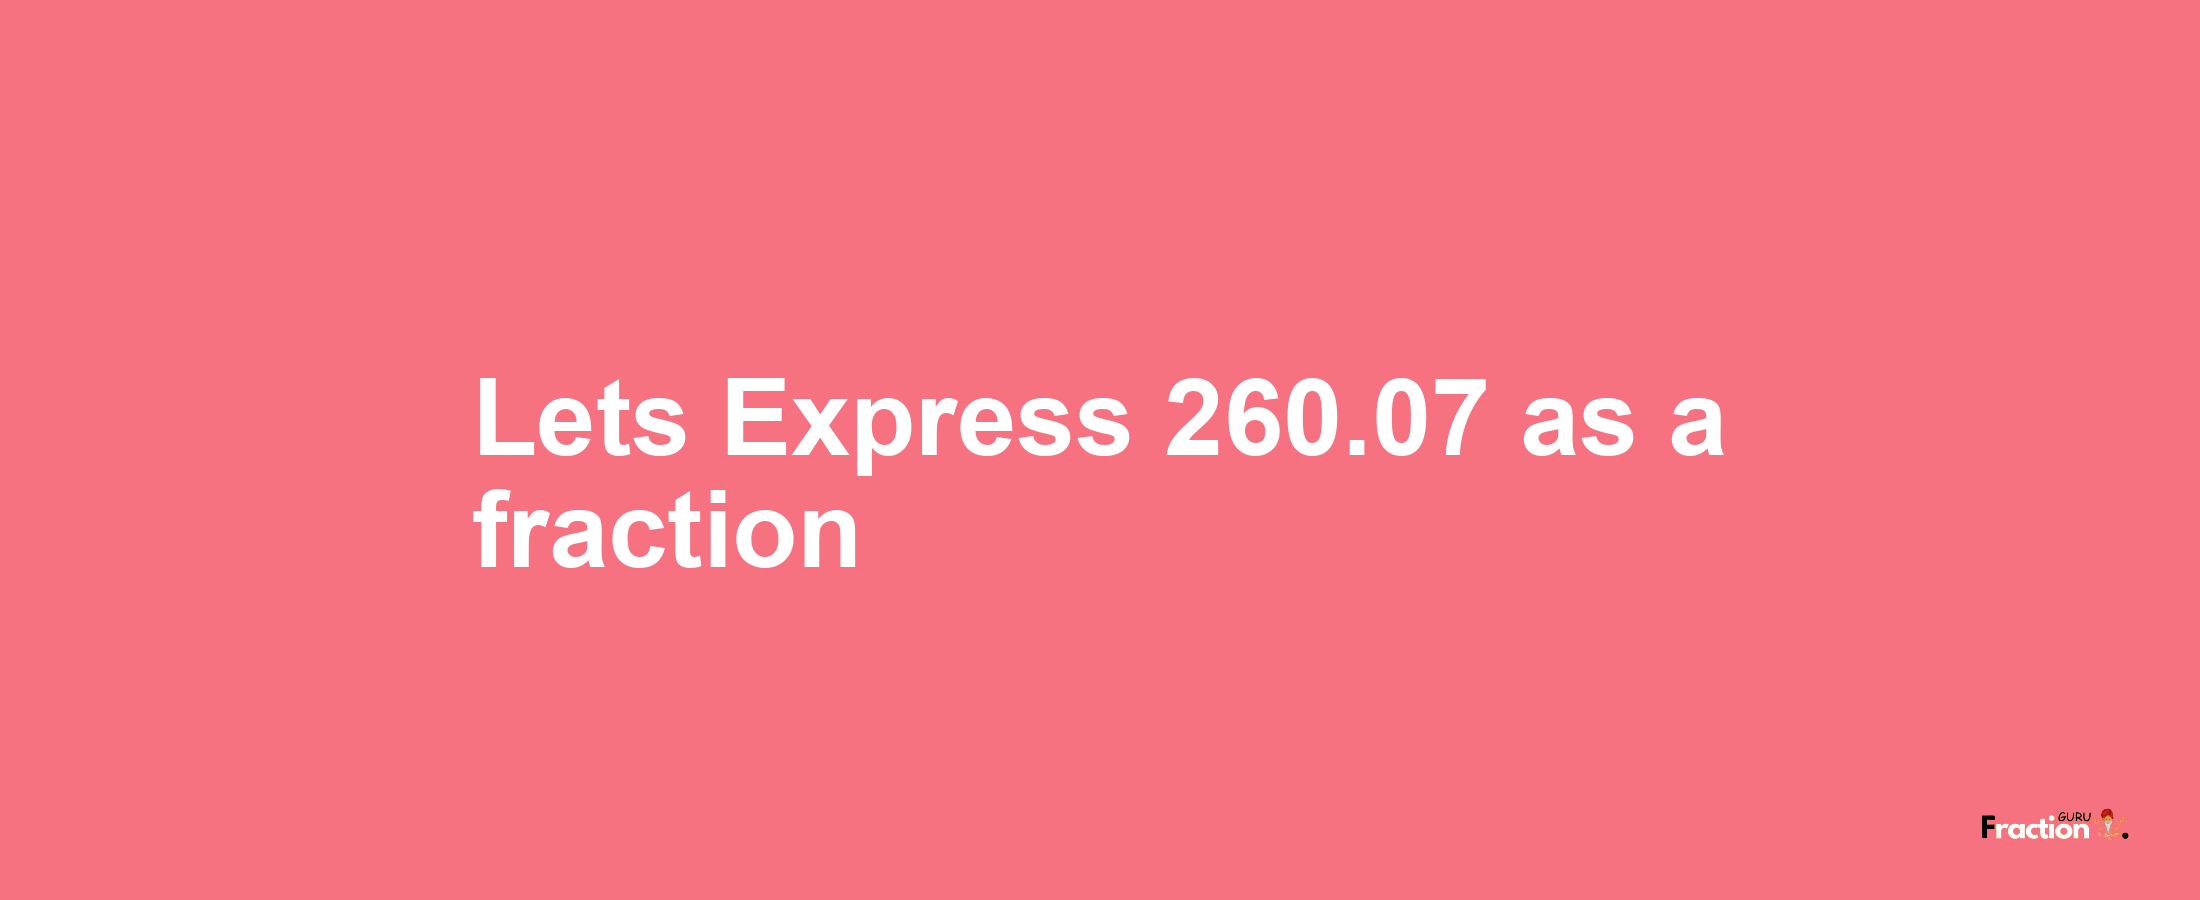 Lets Express 260.07 as afraction